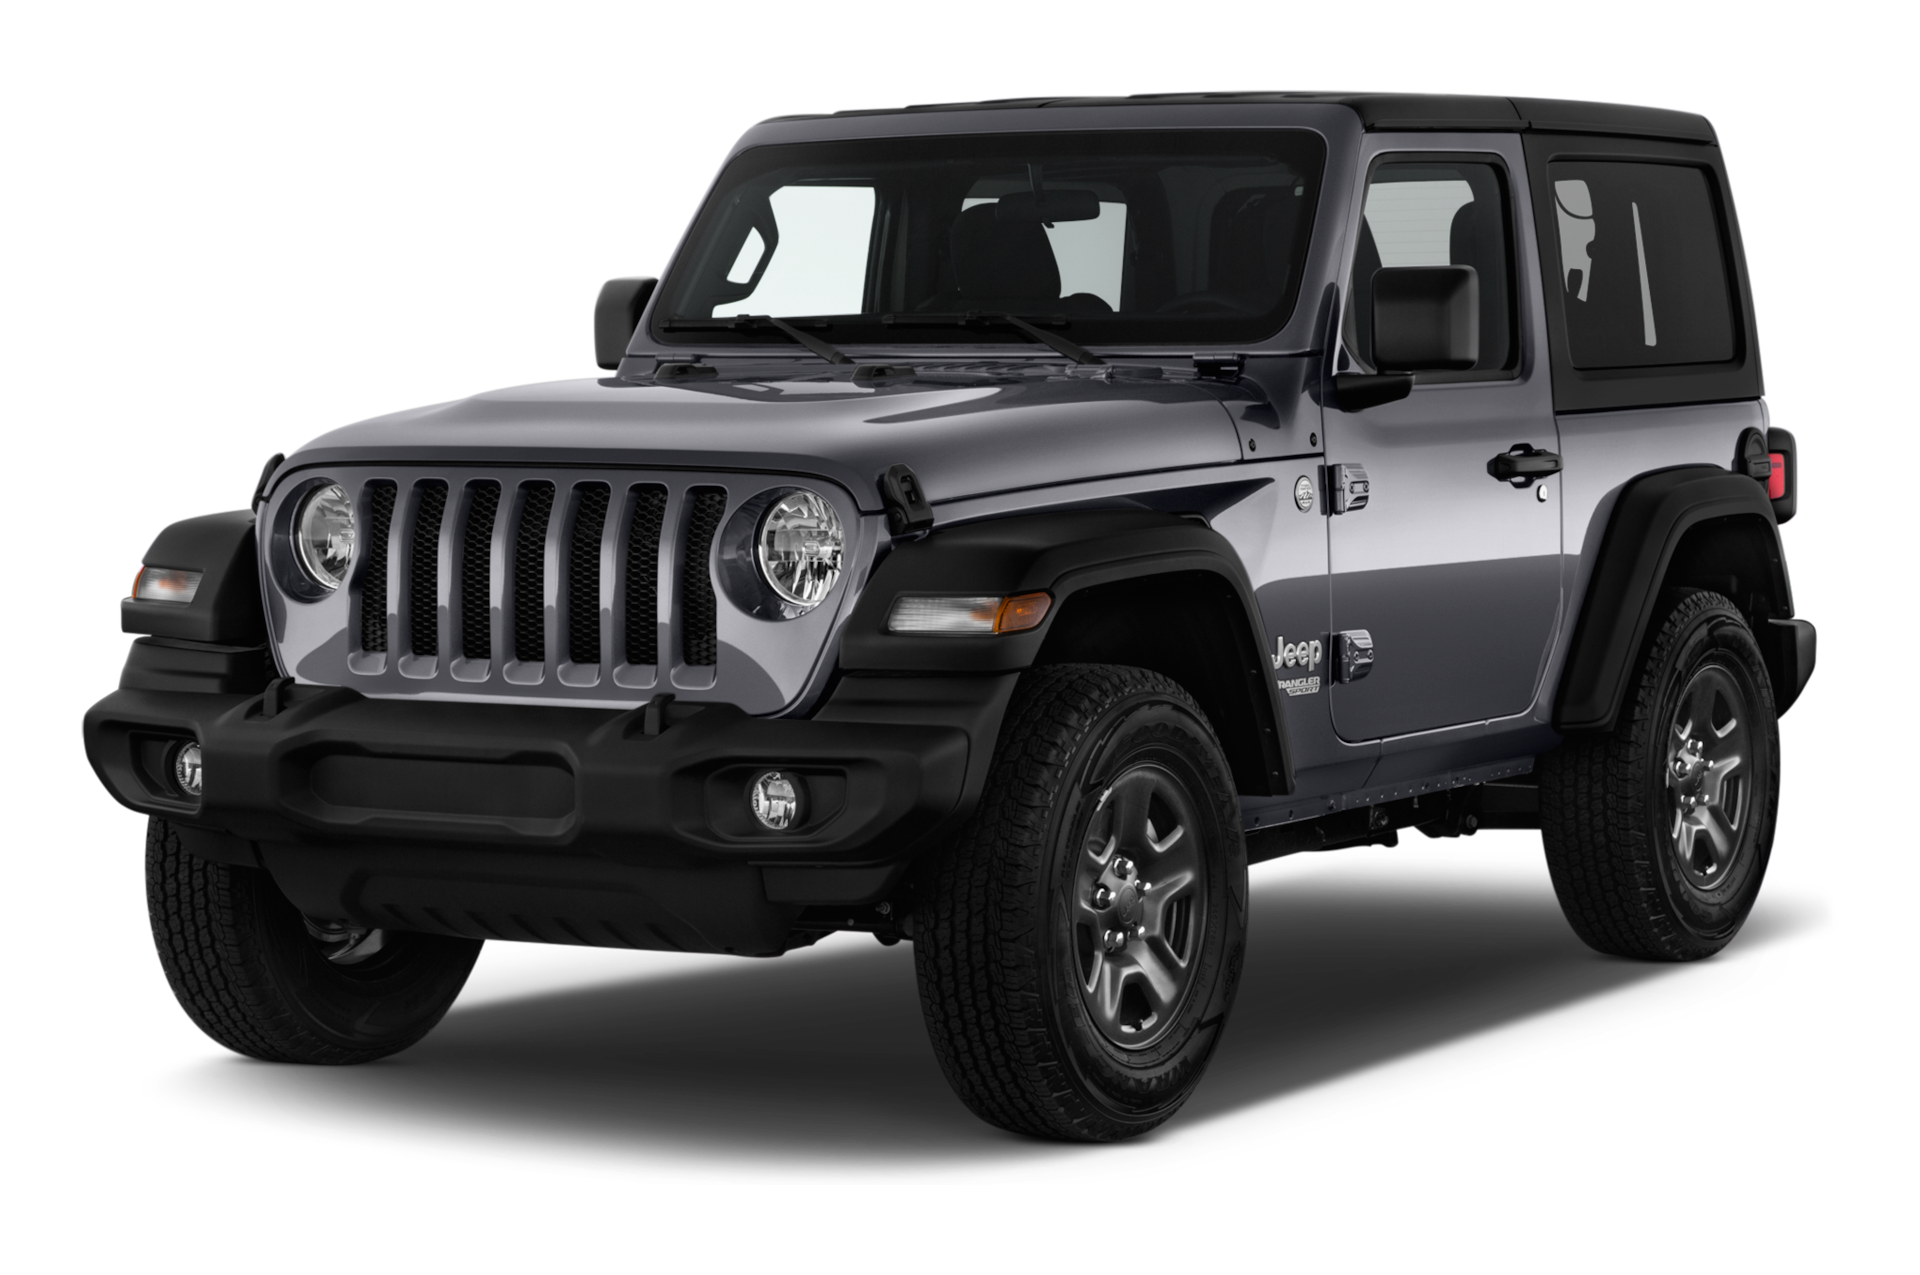 2018 Jeep Wrangler Prices, Reviews, and Photos - MotorTrend